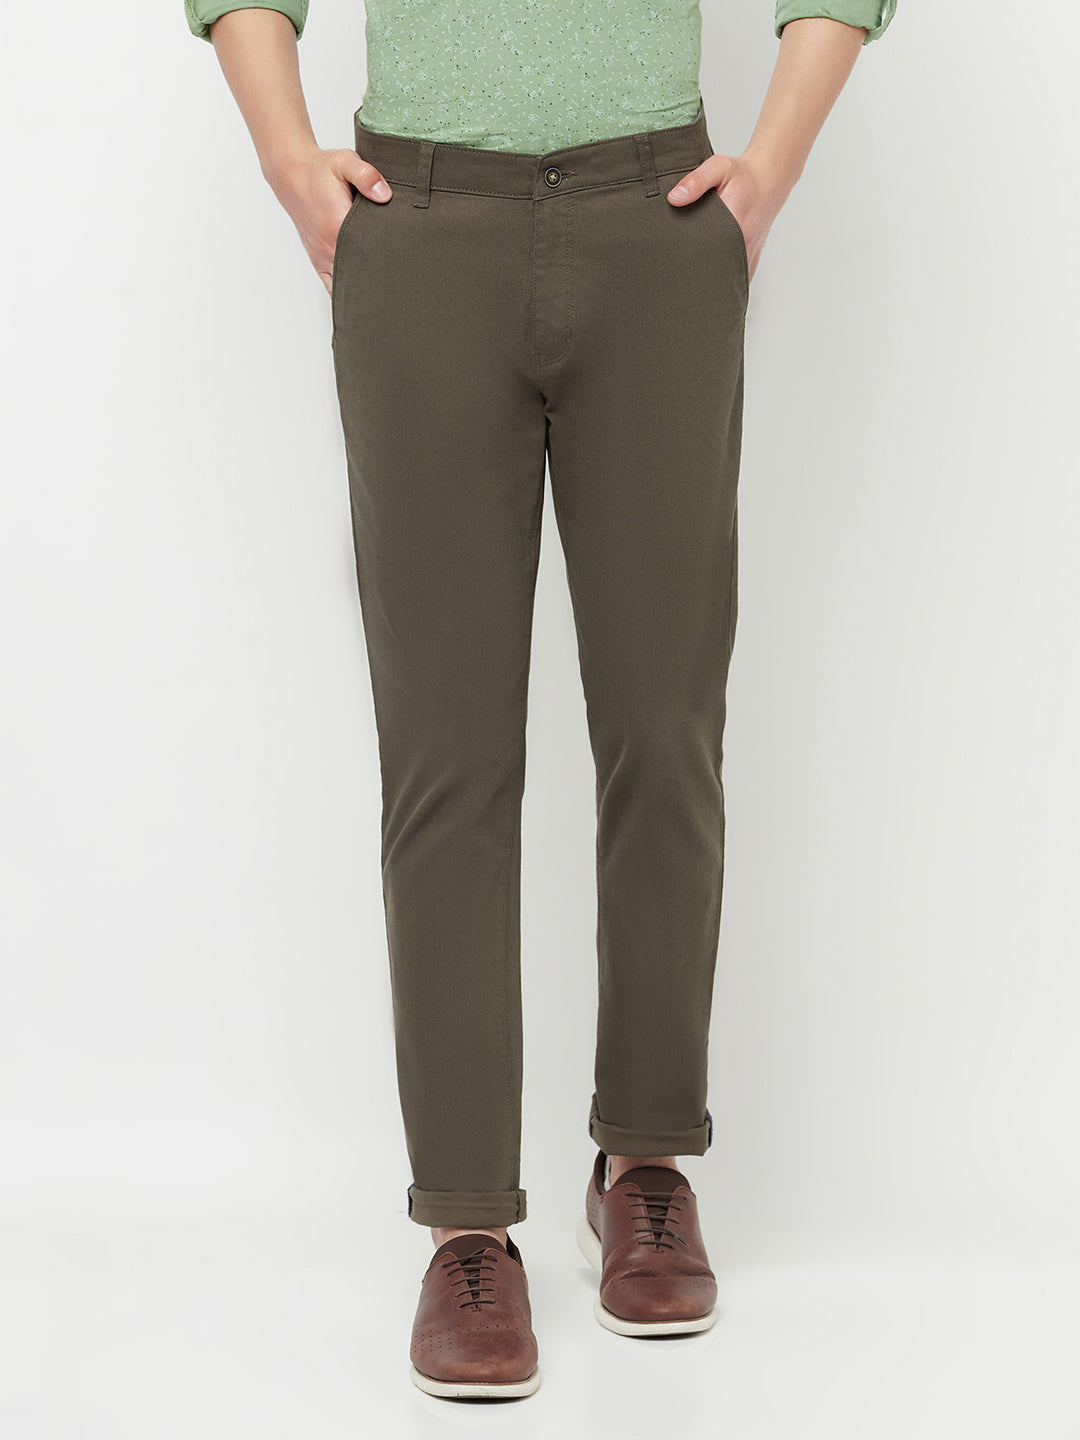 Olive Trousers - Men Trousers